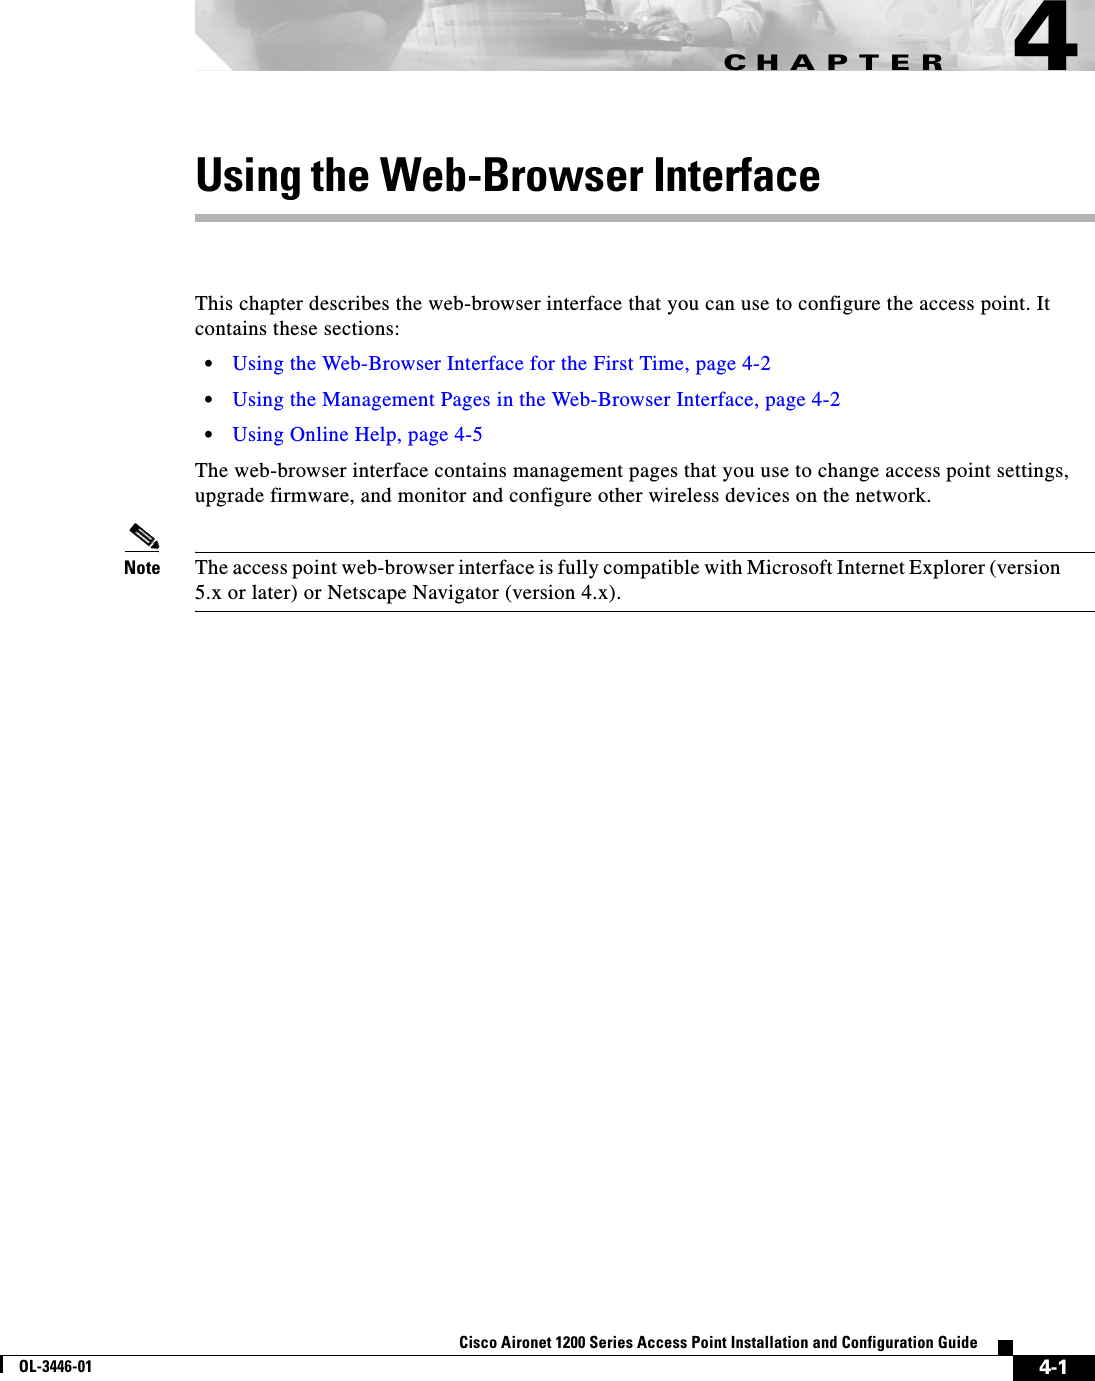 CHAPTER4-1Cisco Aironet 1200 Series Access Point Installation and Configuration GuideOL-3446-014Using the Web-Browser InterfaceThis chapter describes the web-browser interface that you can use to configure the access point. It contains these sections:•Using the Web-Browser Interface for the First Time, page 4-2•Using the Management Pages in the Web-Browser Interface, page 4-2•Using Online Help, page 4-5The web-browser interface contains management pages that you use to change access point settings, upgrade firmware, and monitor and configure other wireless devices on the network.Note The access point web-browser interface is fully compatible with Microsoft Internet Explorer (version 5.x or later) or Netscape Navigator (version 4.x).